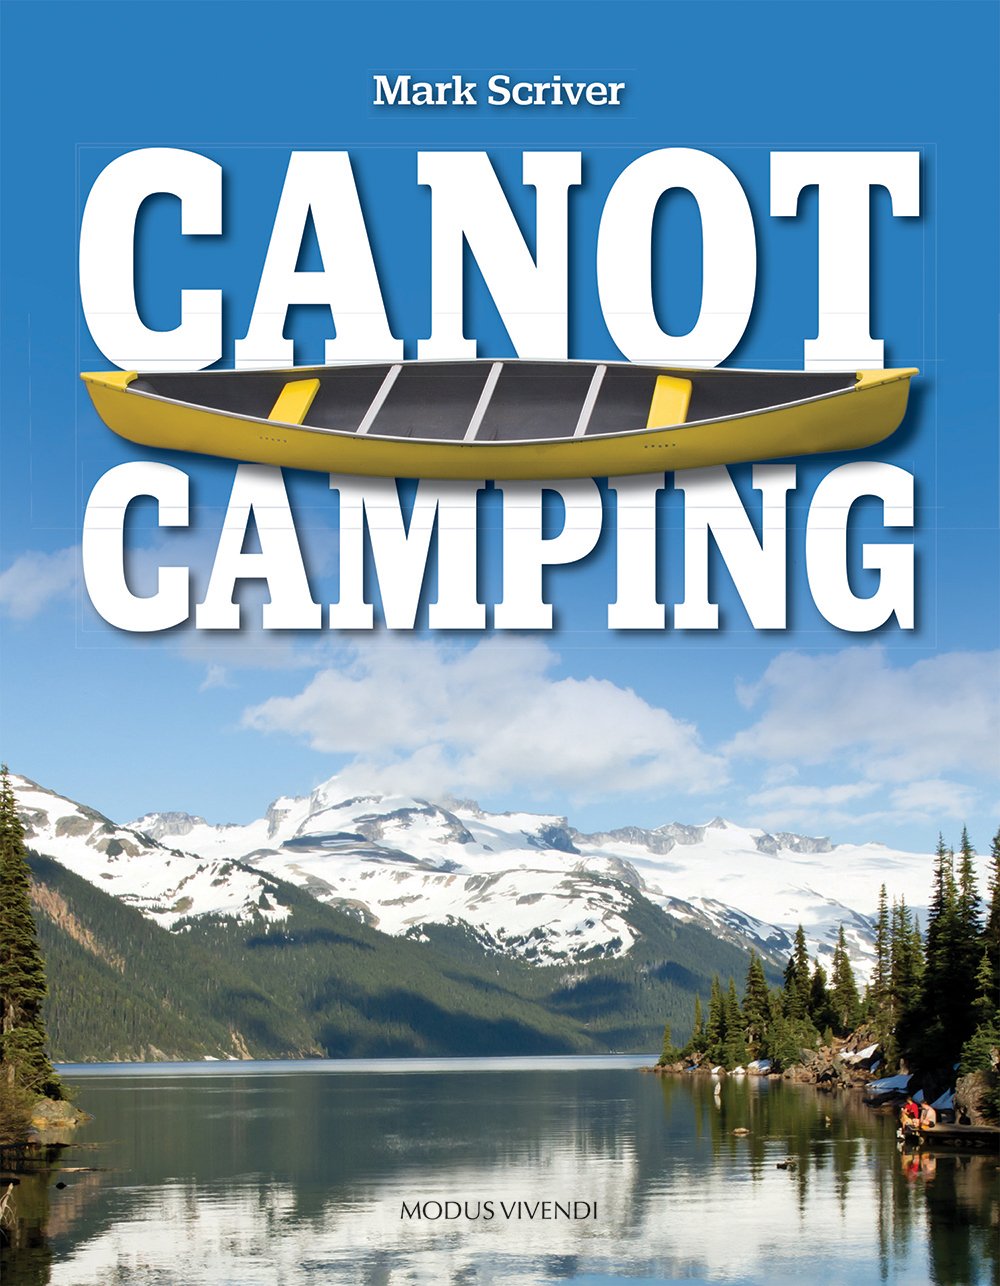 Canot camping - Mark Scriver